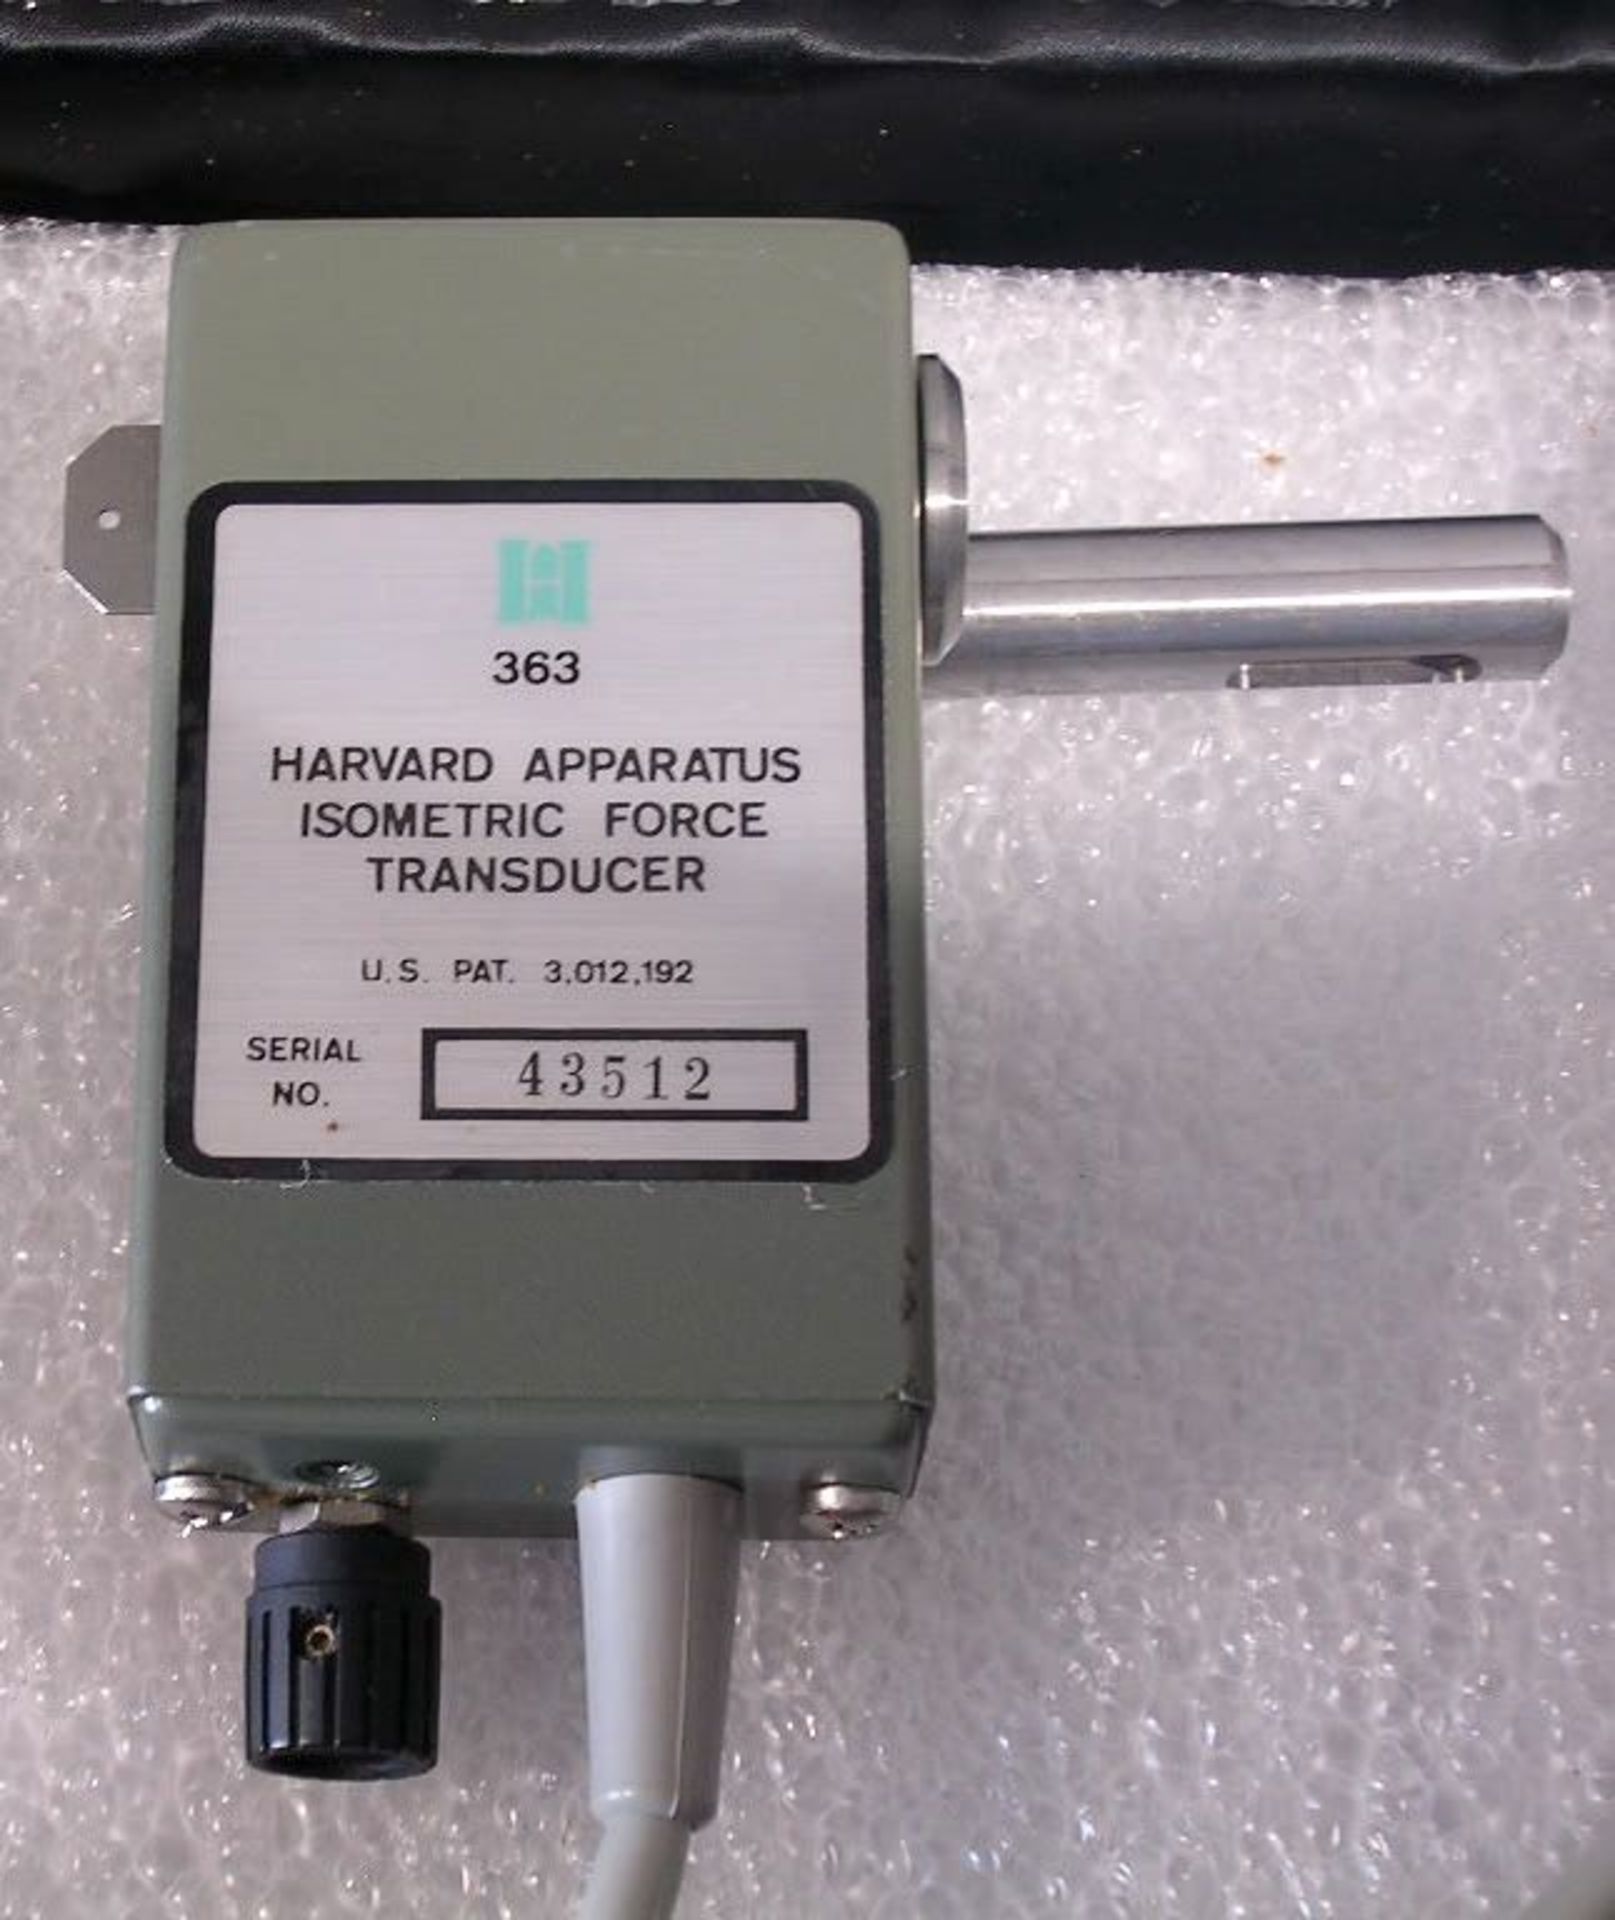 HARVARD APPARATUS Isometric Force Transducer, Model 363, Qty 1, 321468690838 - Image 2 of 4